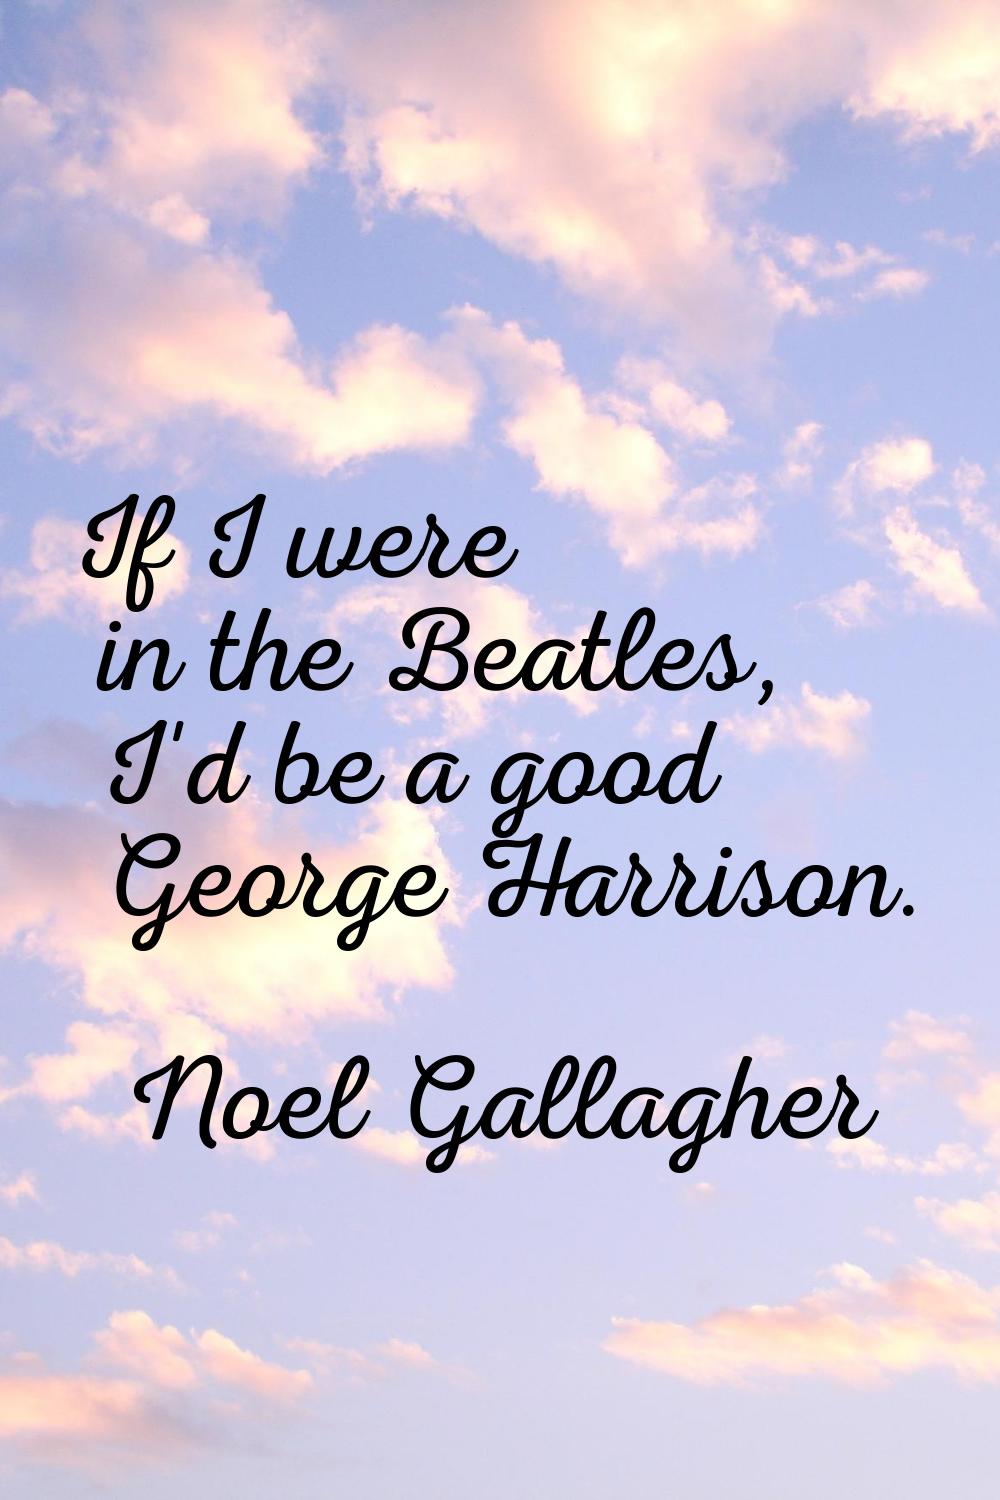 If I were in the Beatles, I'd be a good George Harrison.